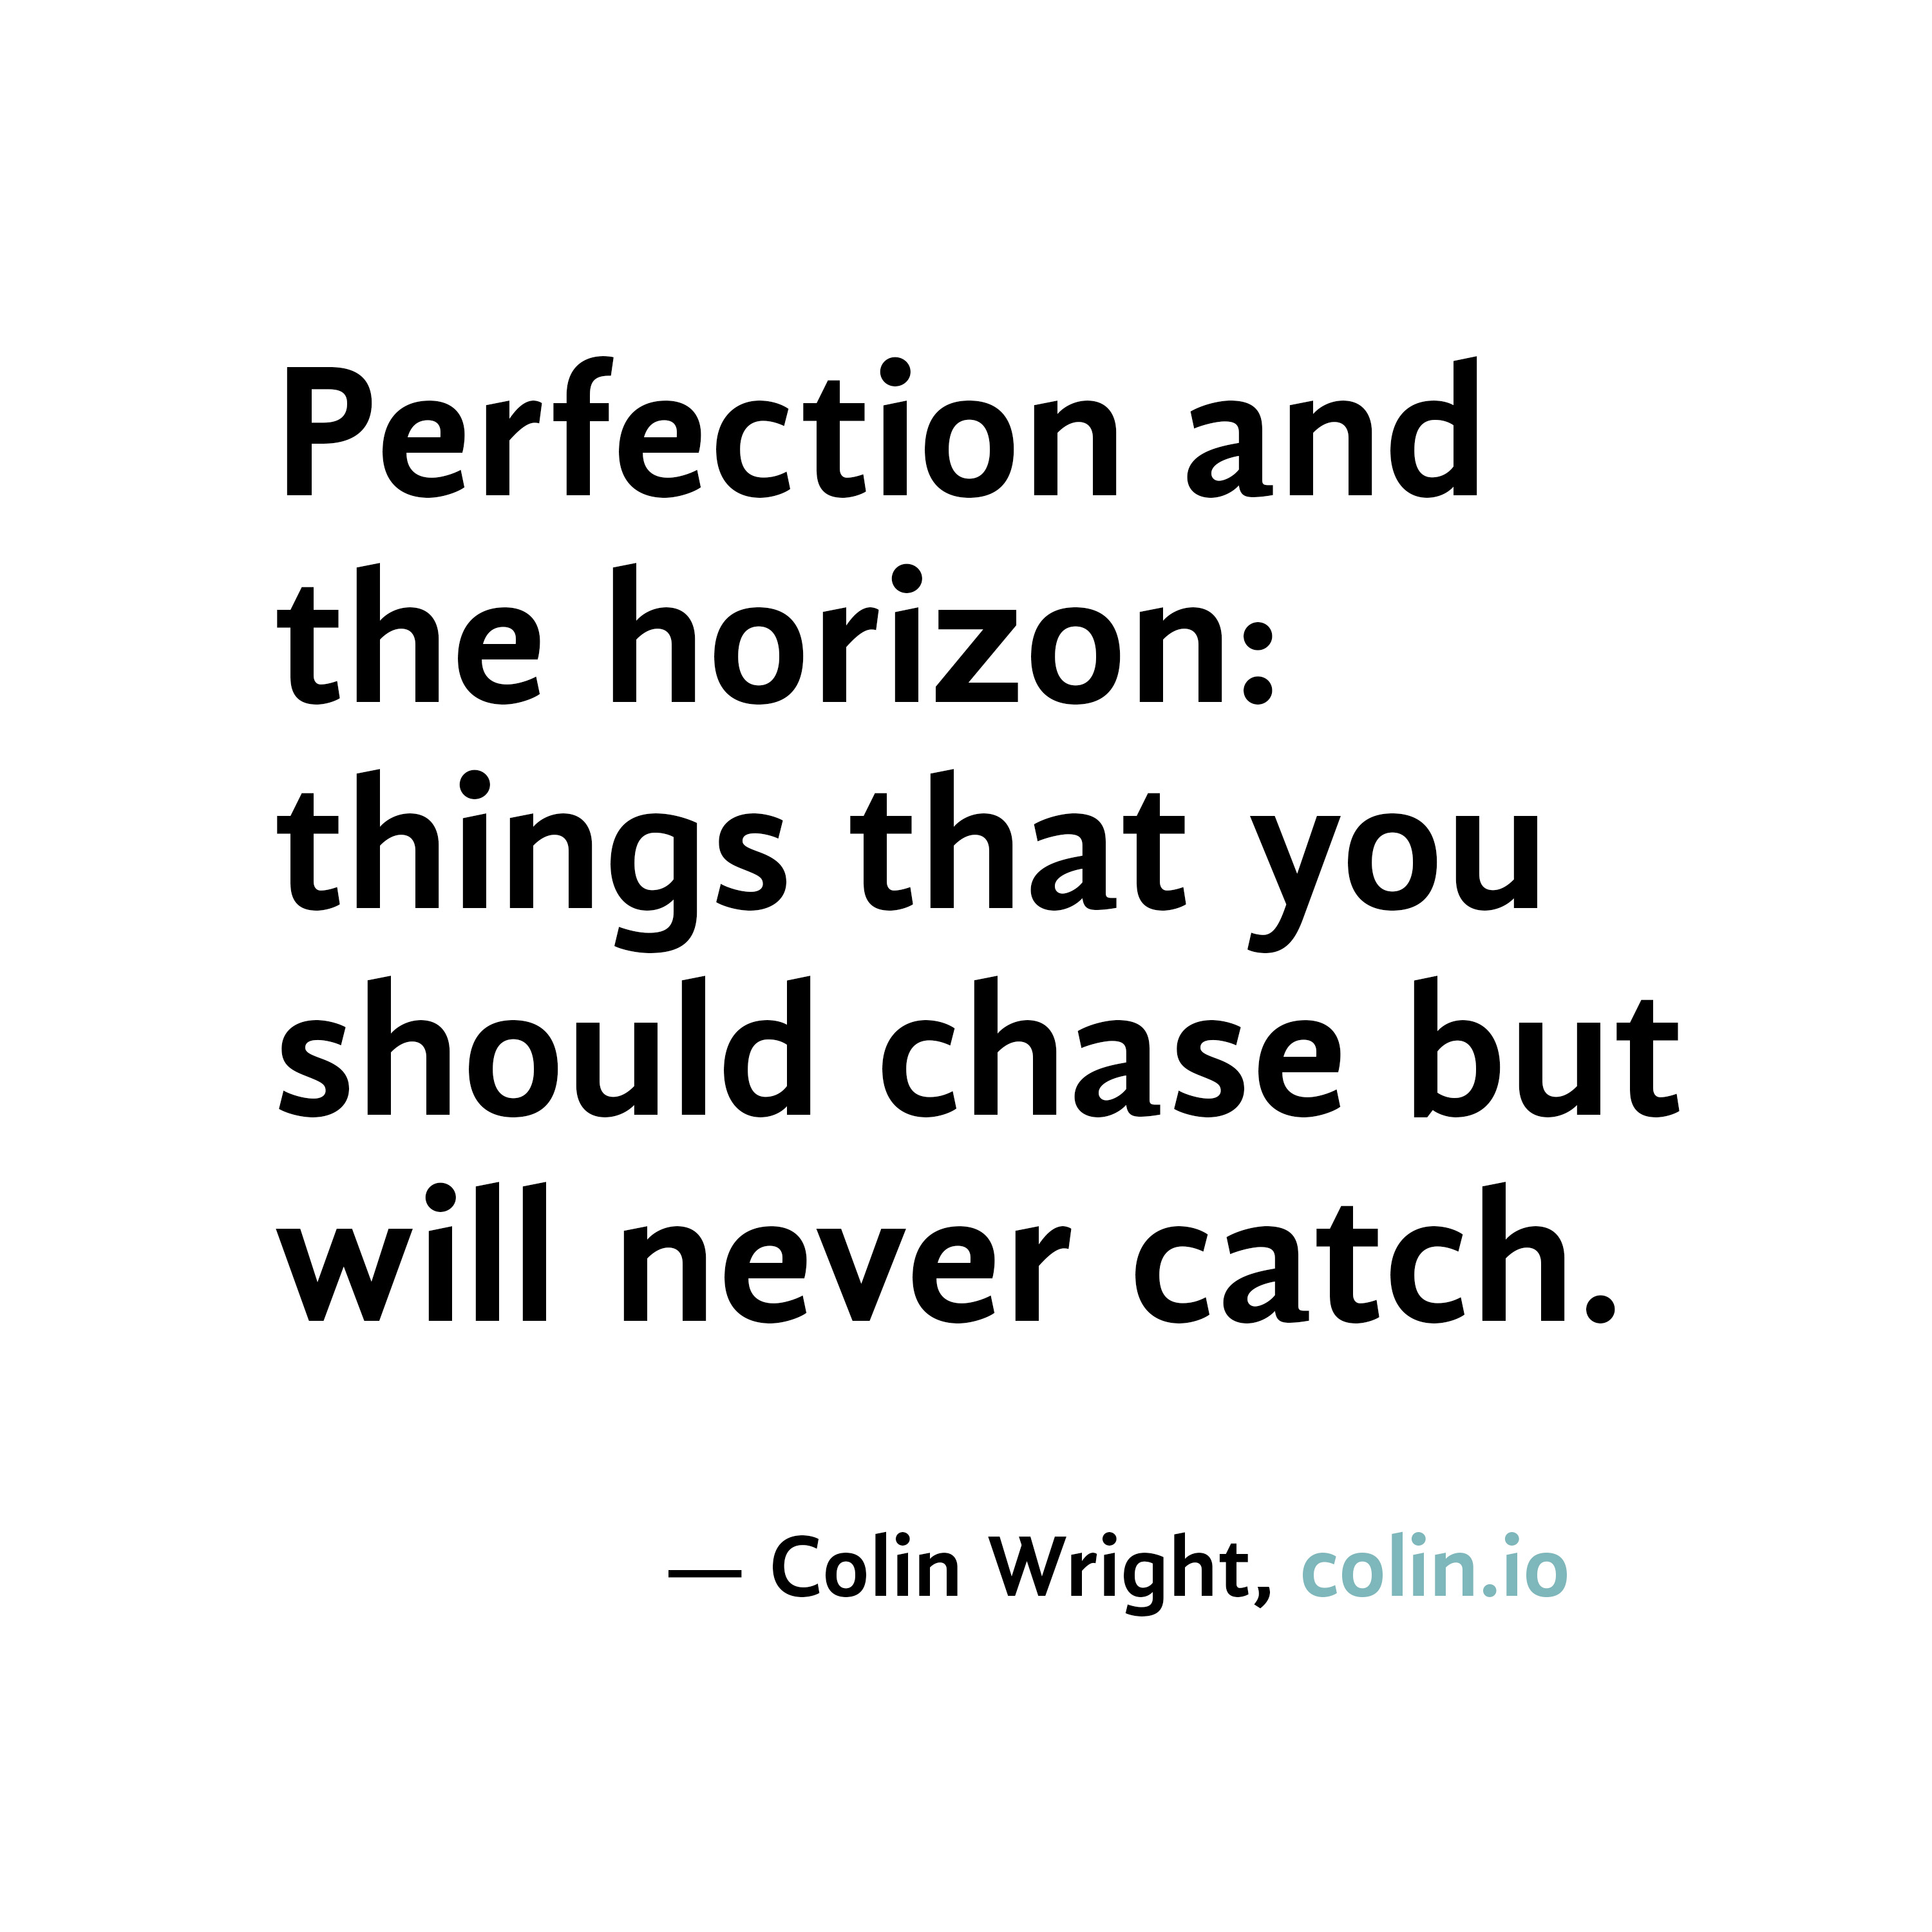 Perfection and the horizon things that you should chase but will never catch. Colin Wright